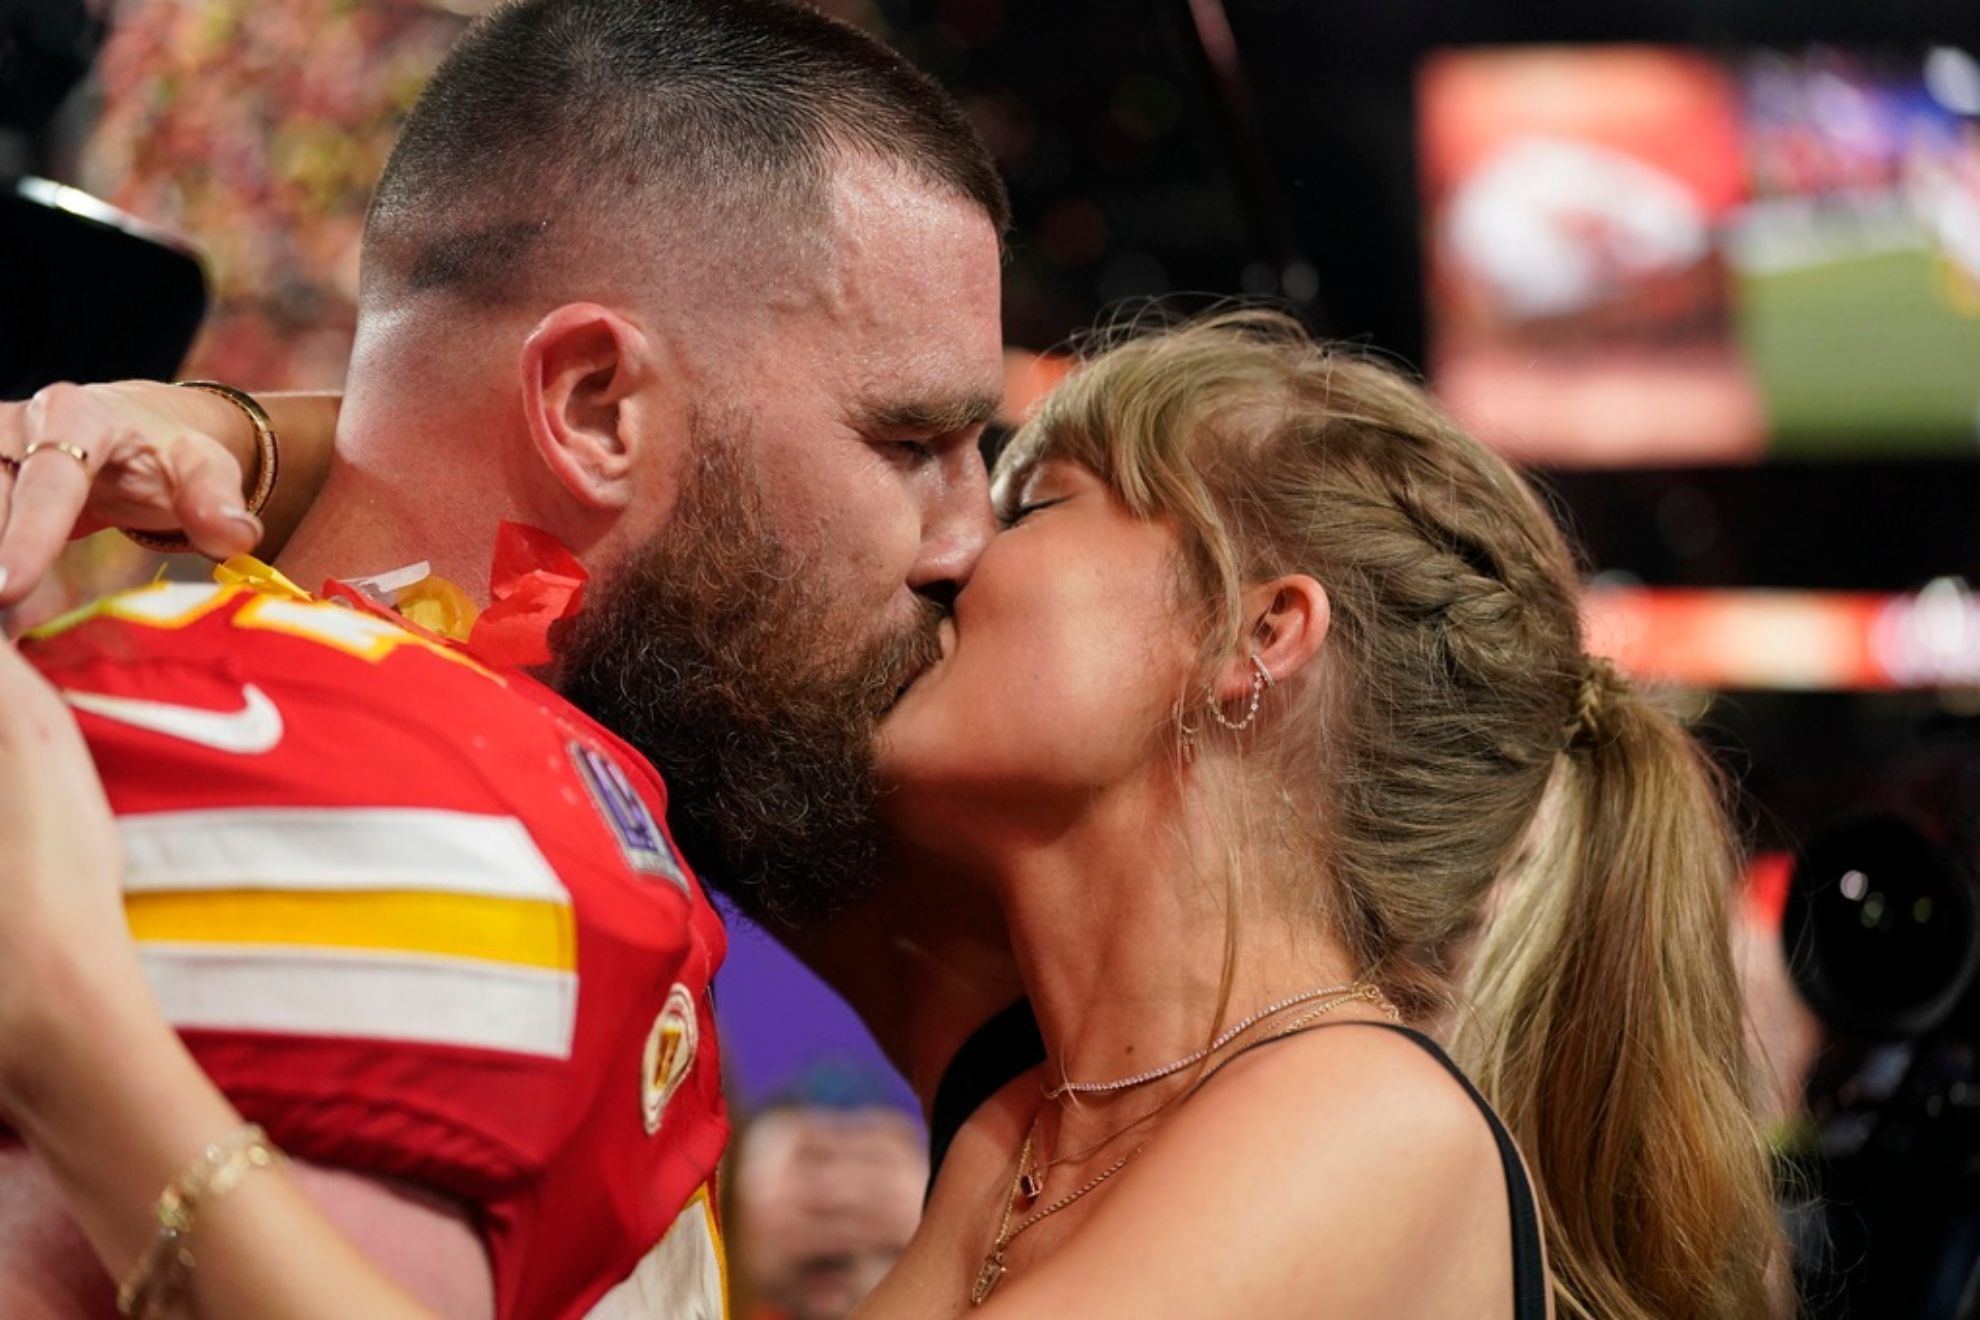 Kelce and Swift are in Australia as he accompanies her on her tour